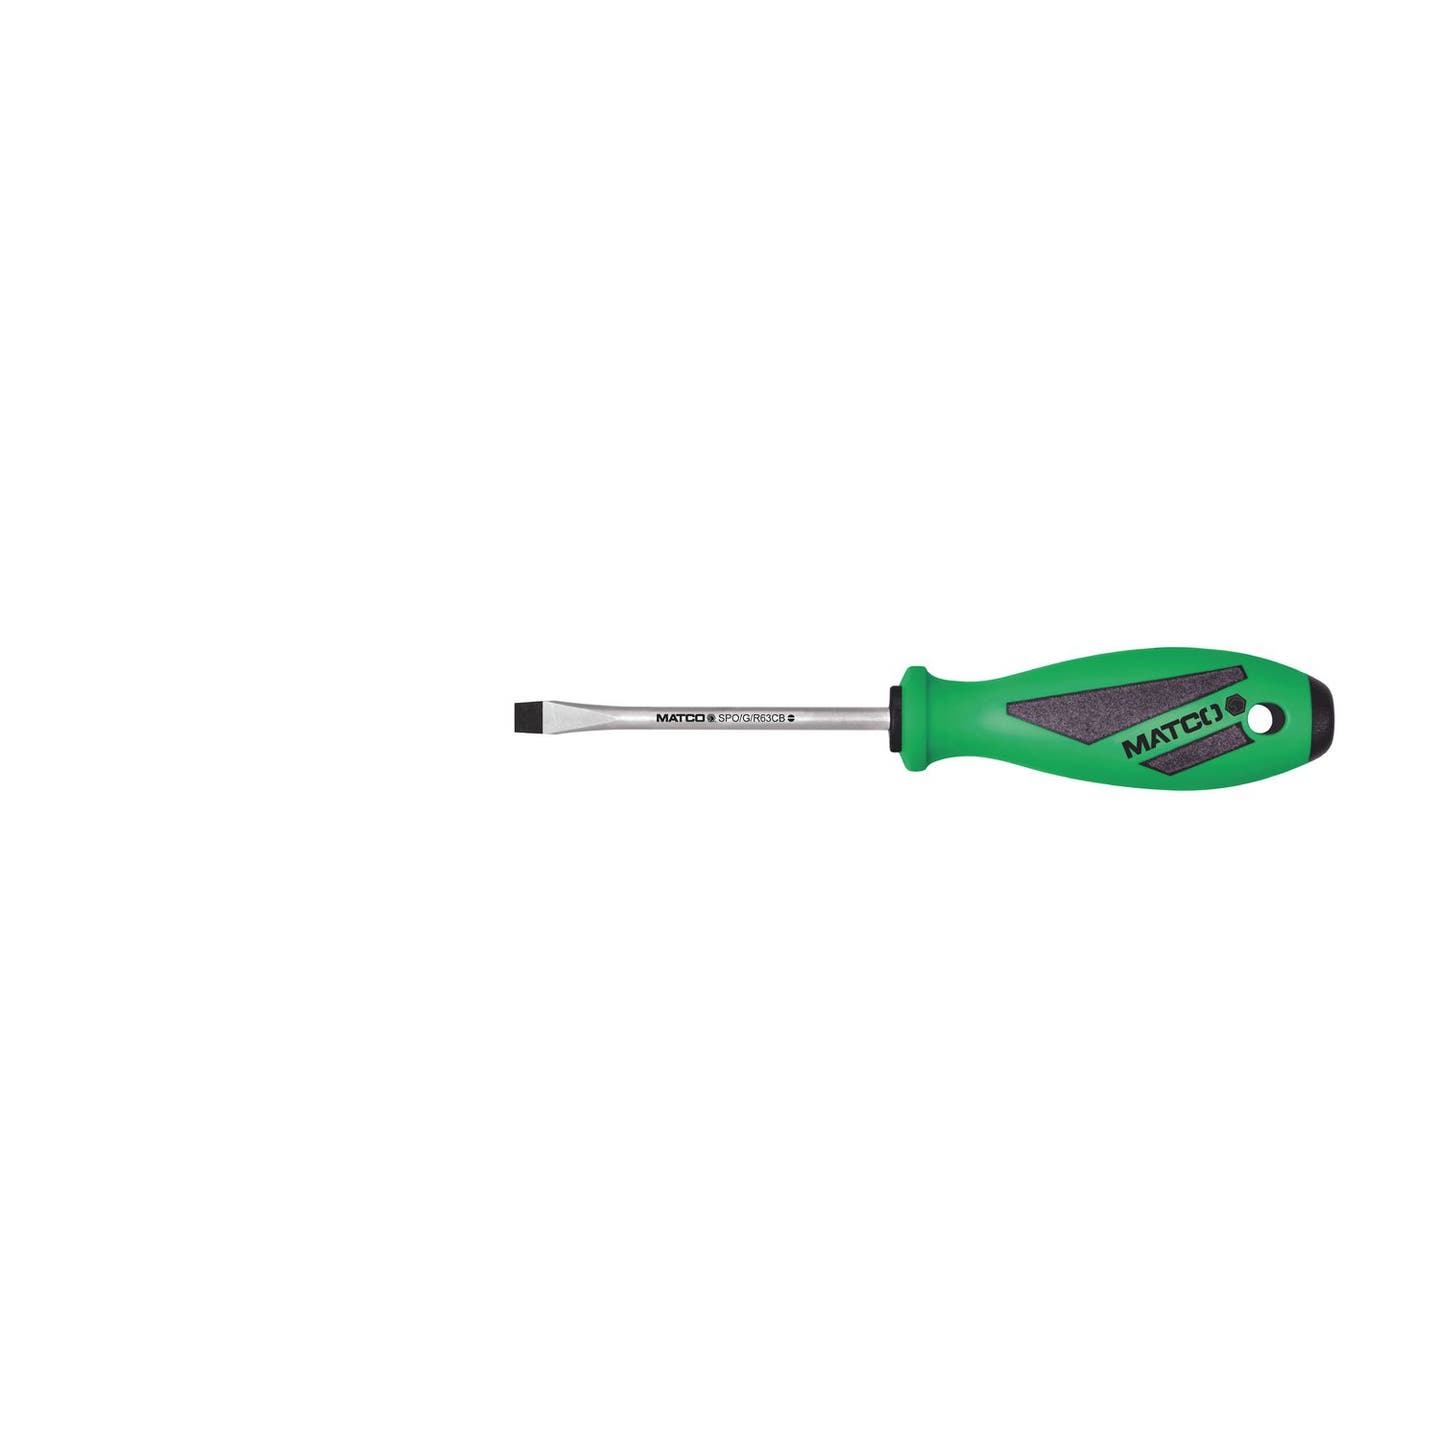 3/16" X 3" SLOTTED SCREWDRIVER - GREEN